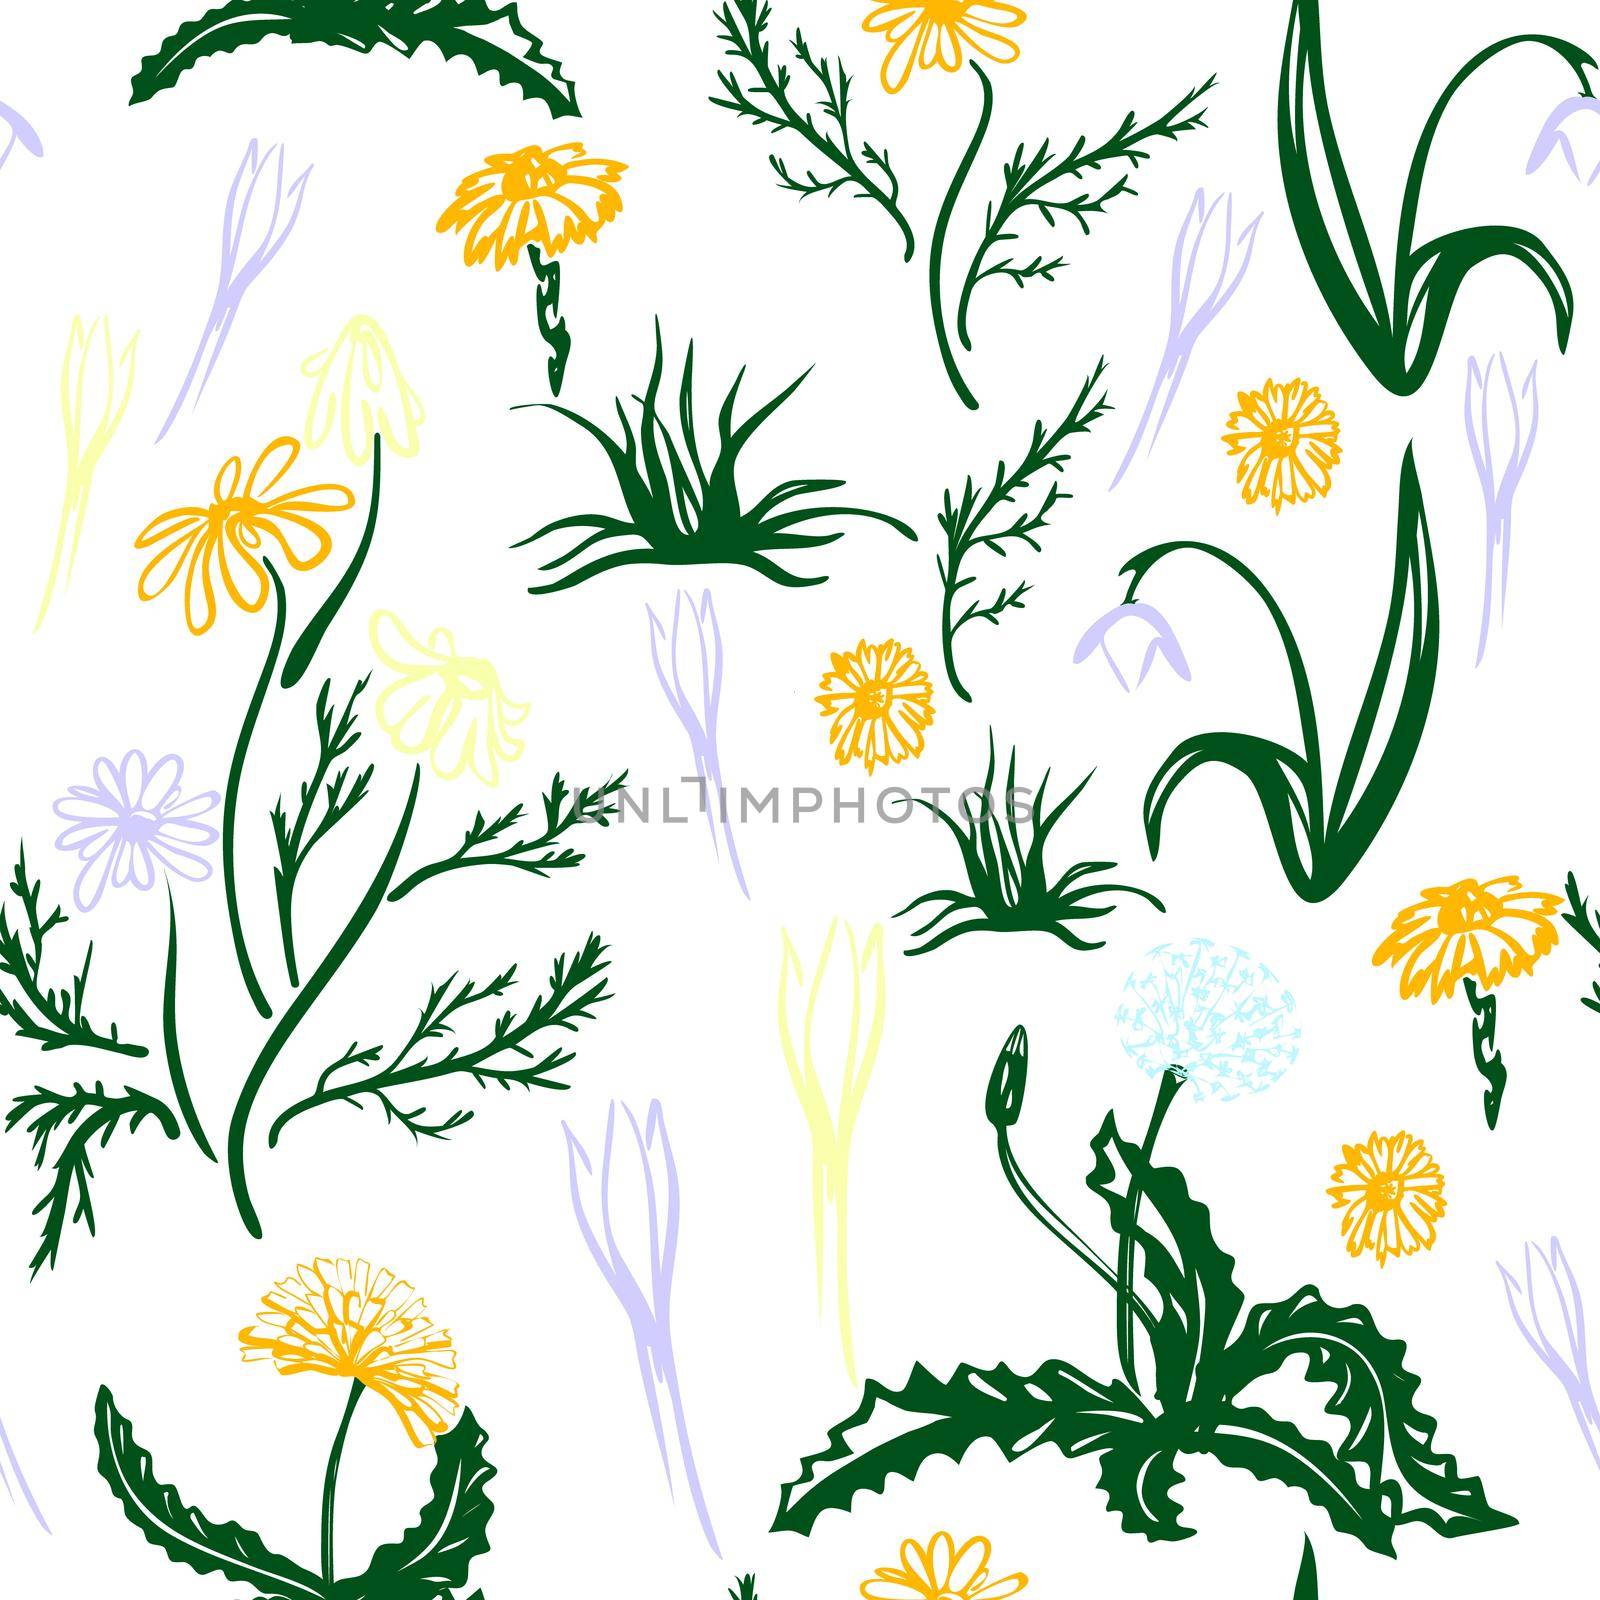 Seamless pattern with flowers, leaves, branches. colorful endless floral background. The elegant illustration for fashion prints, fabric, scrapbook